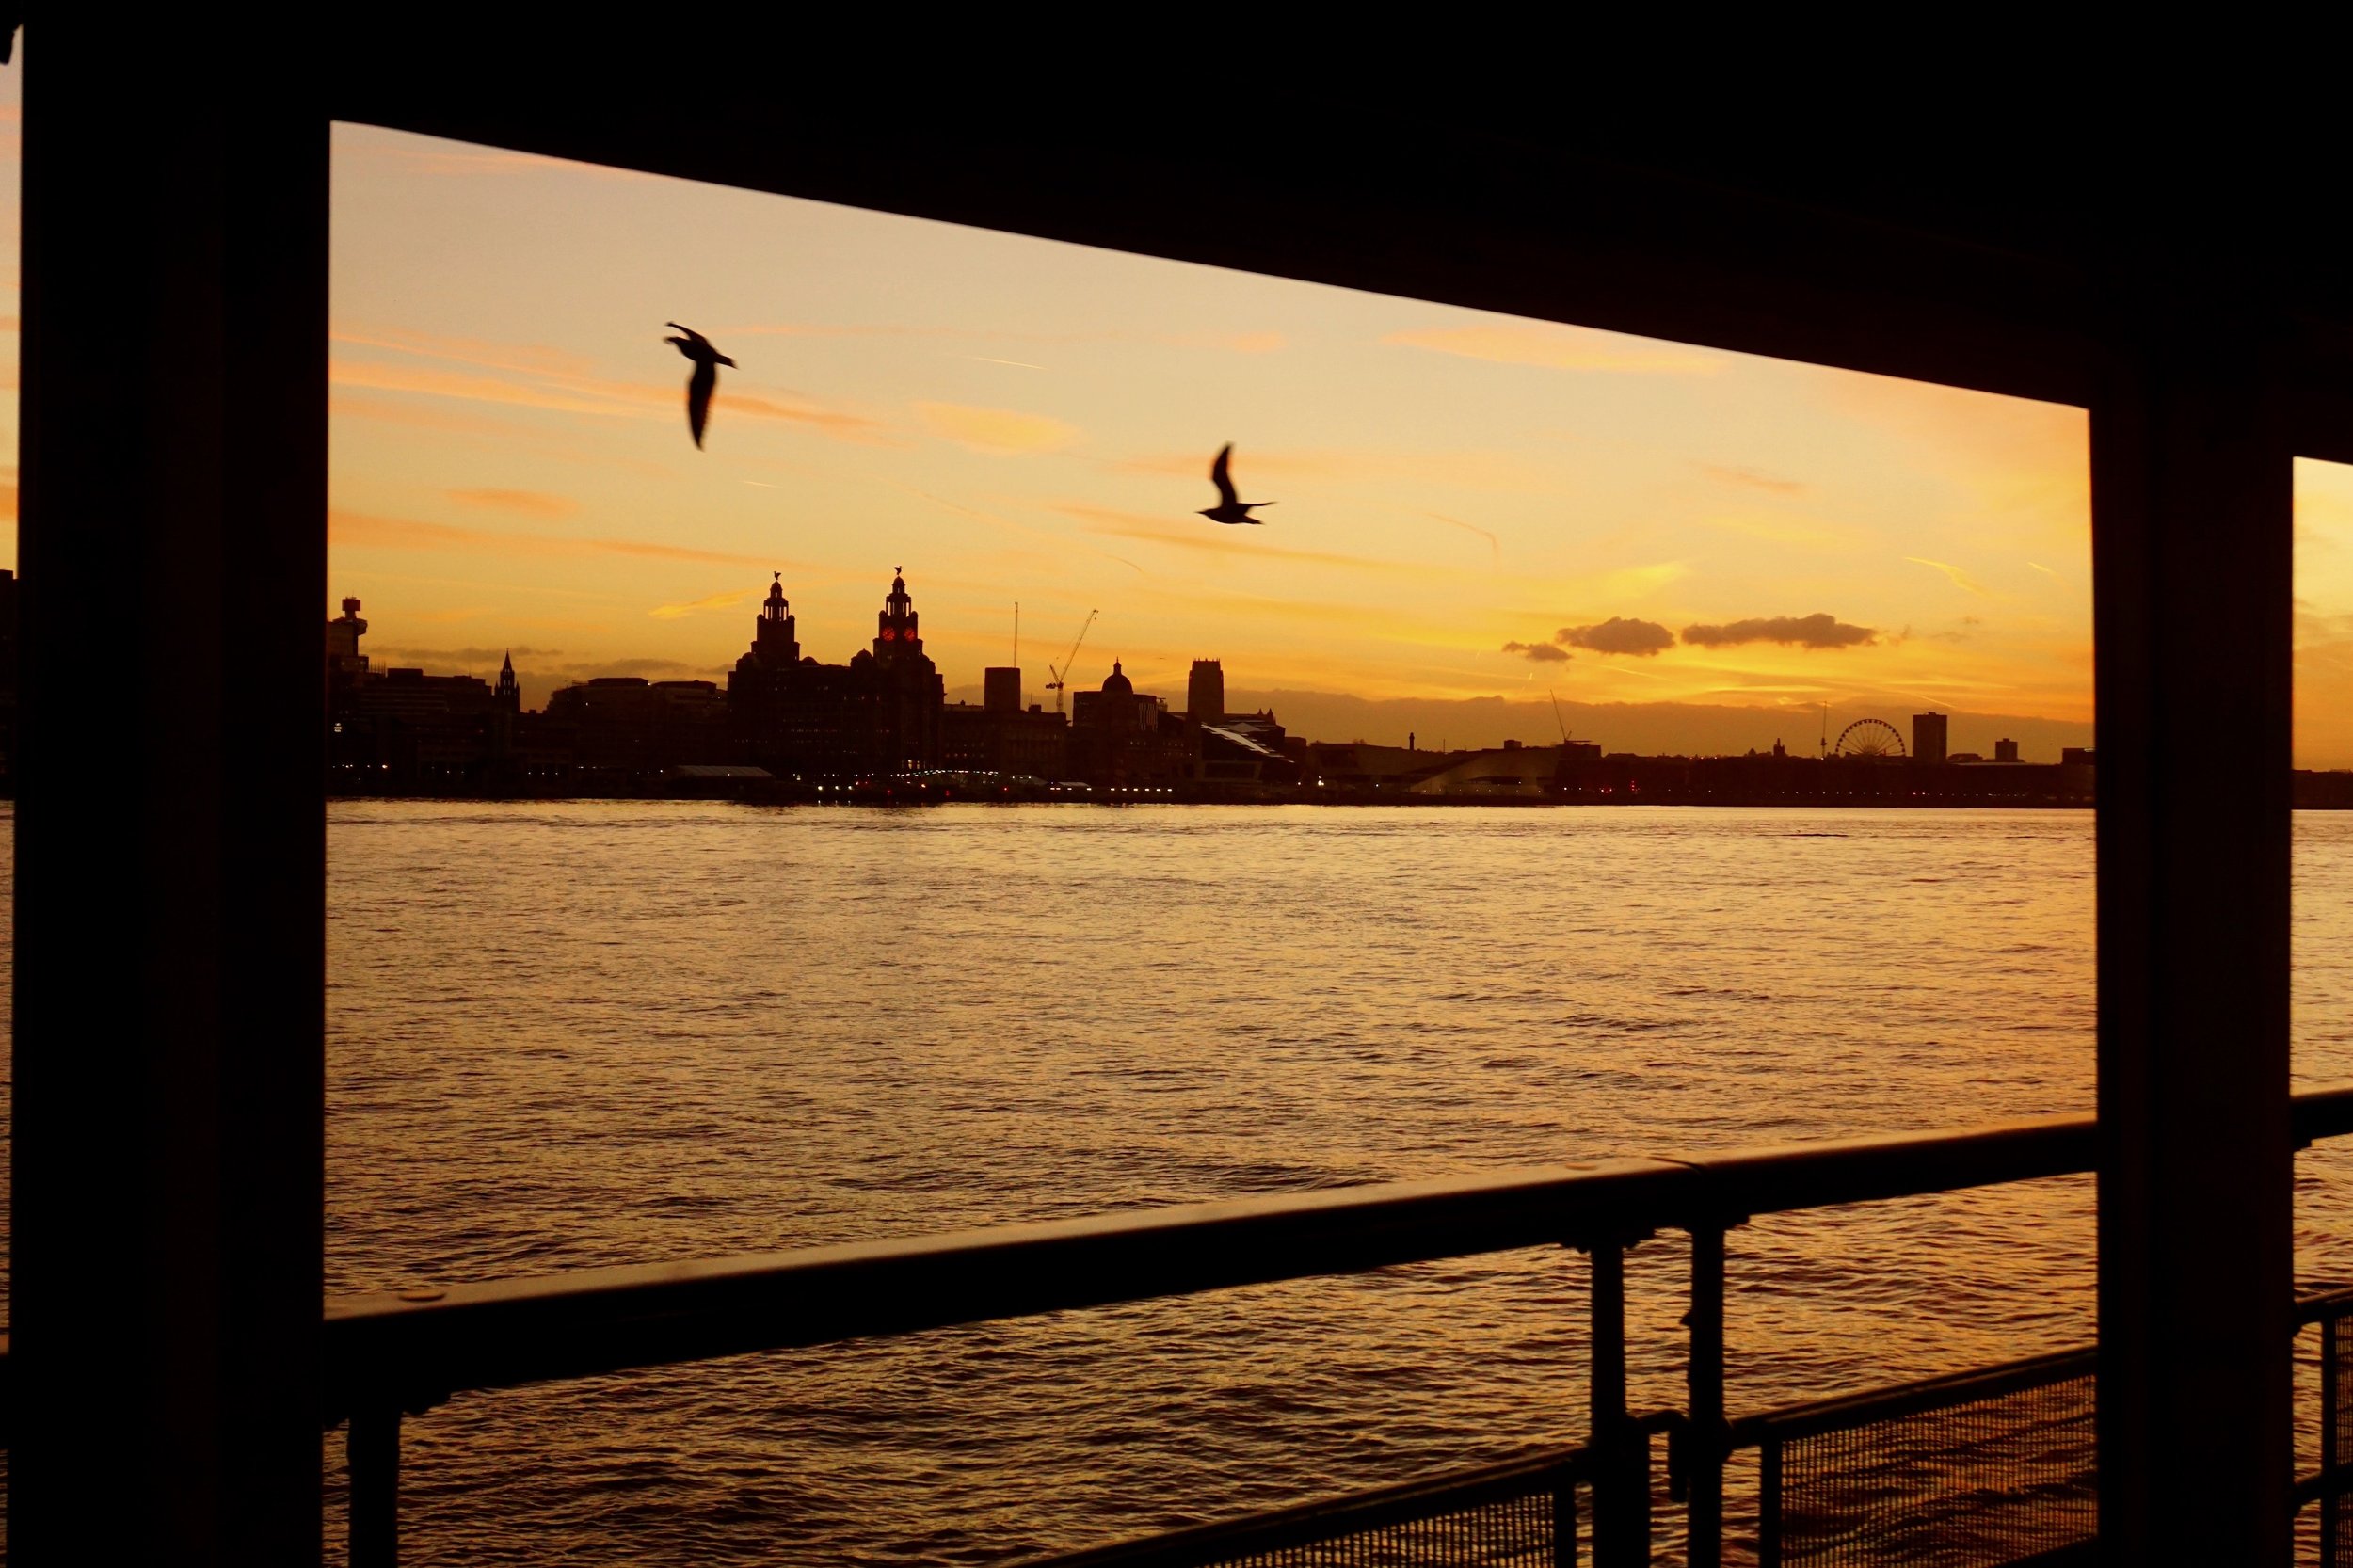 Sunrise over The Mersey